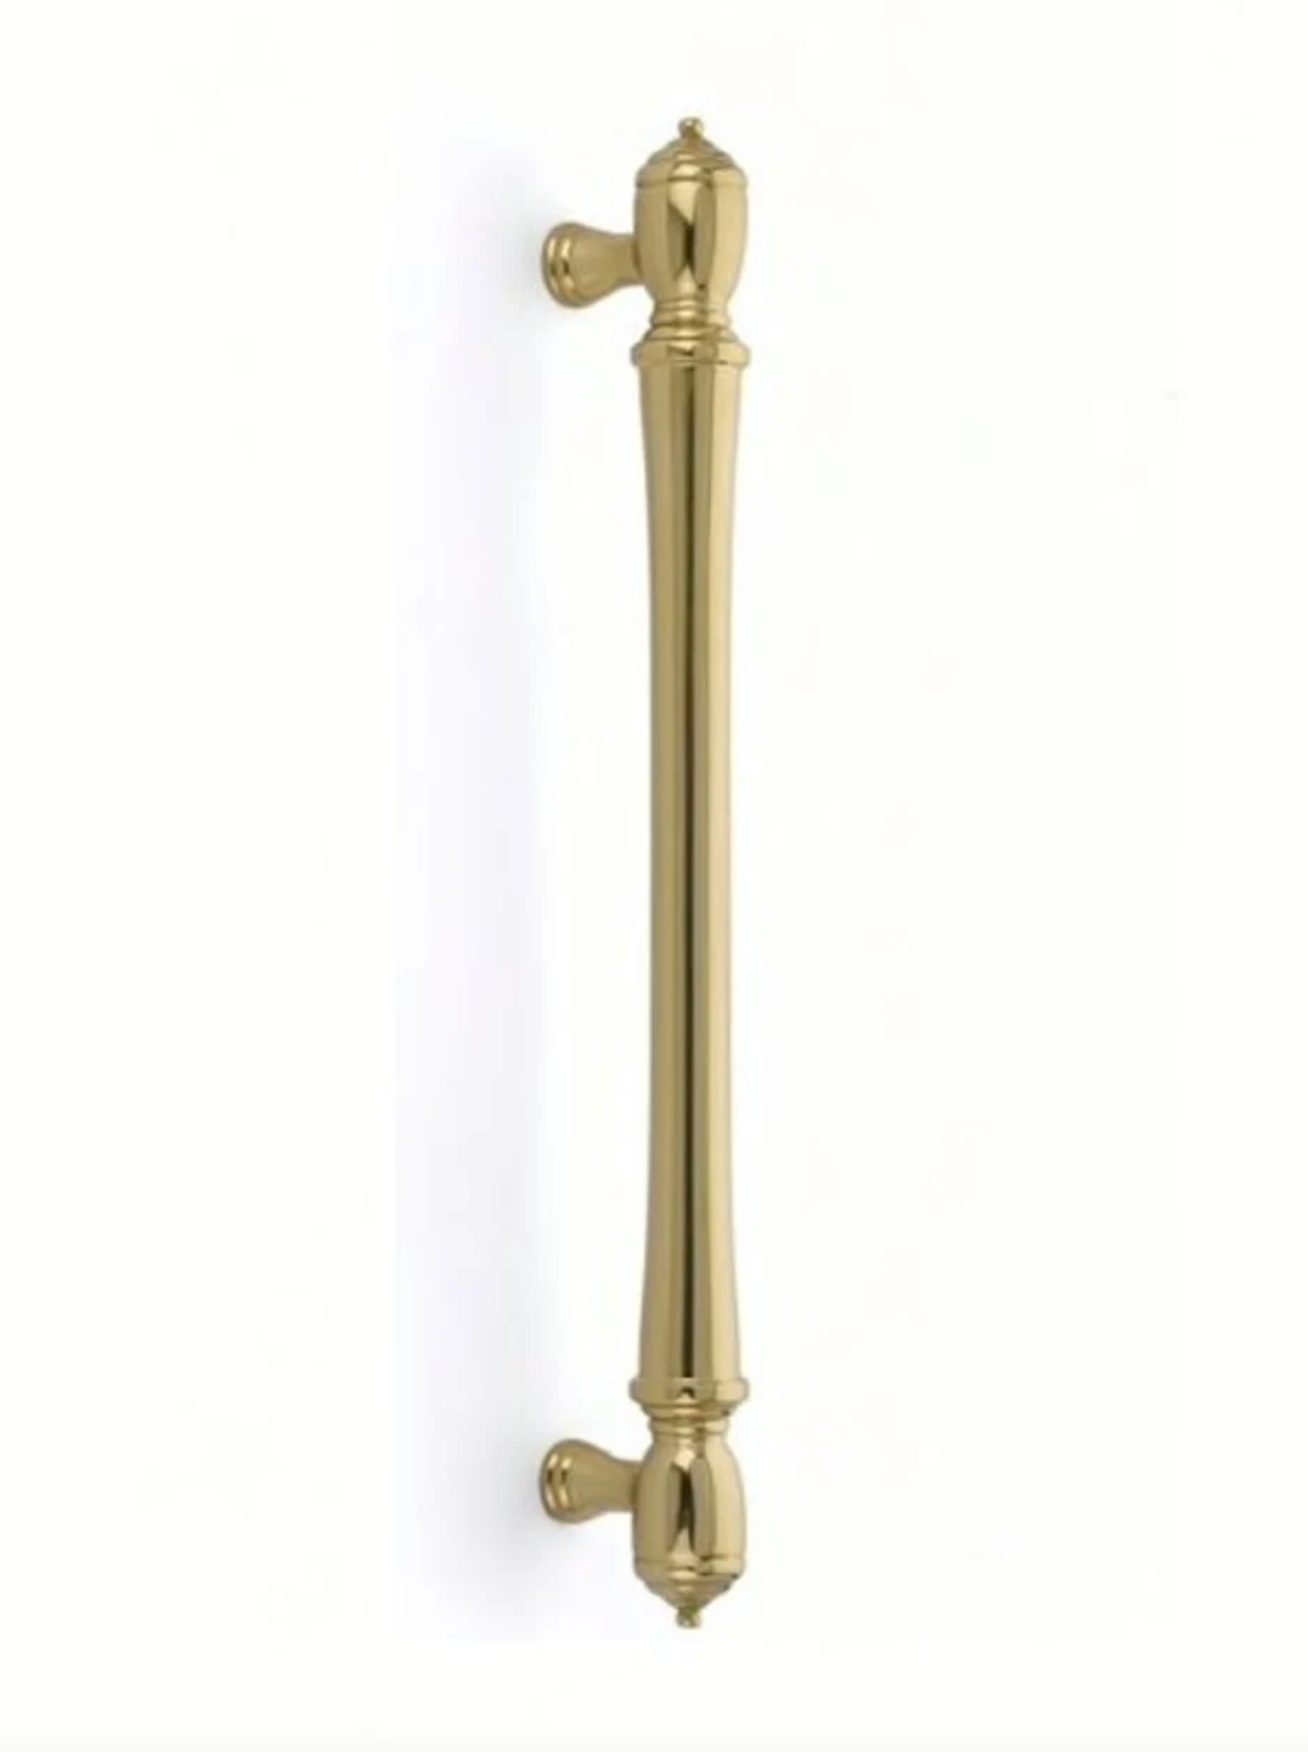 Unlacquered Polished Brass "Heritage" Appliance Pull- Kitchen Appliance Handles - Industry Hardware